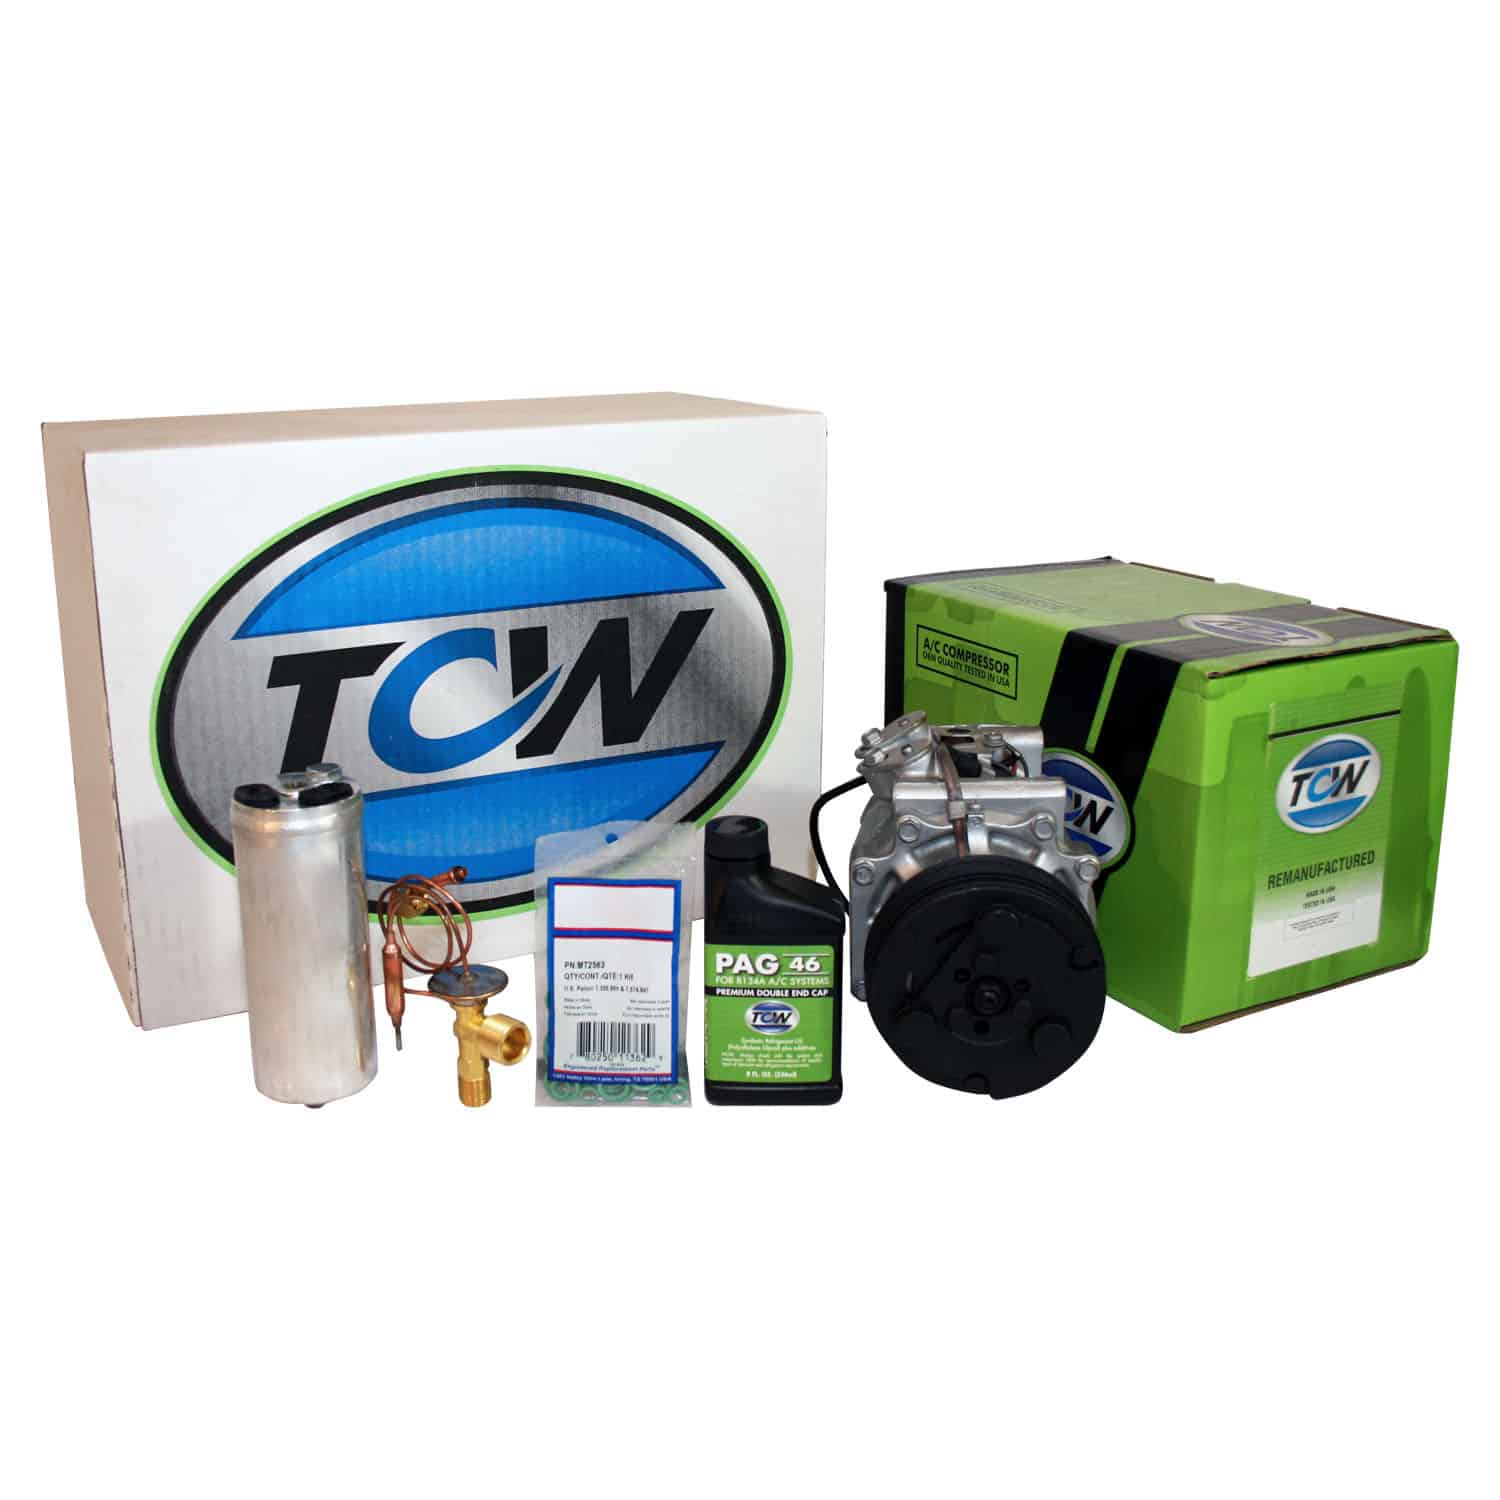 TCW Vehicle A/C Kit K1000308R Remanufactured Product Image field_60b6a13a6e67c